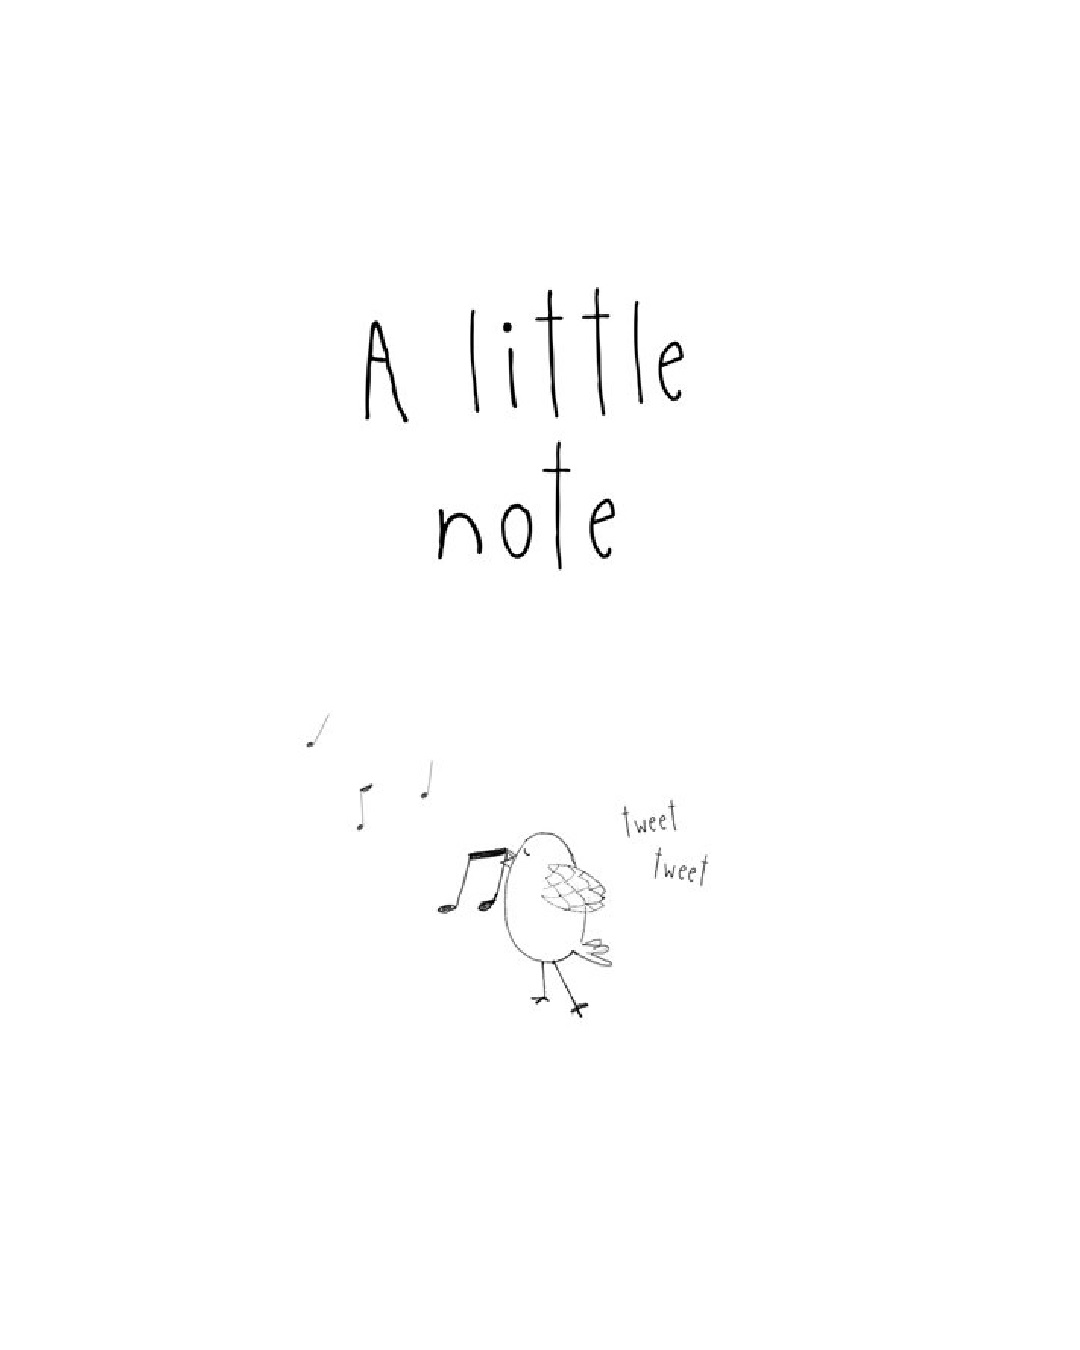 A little note written on card with bird and music notes